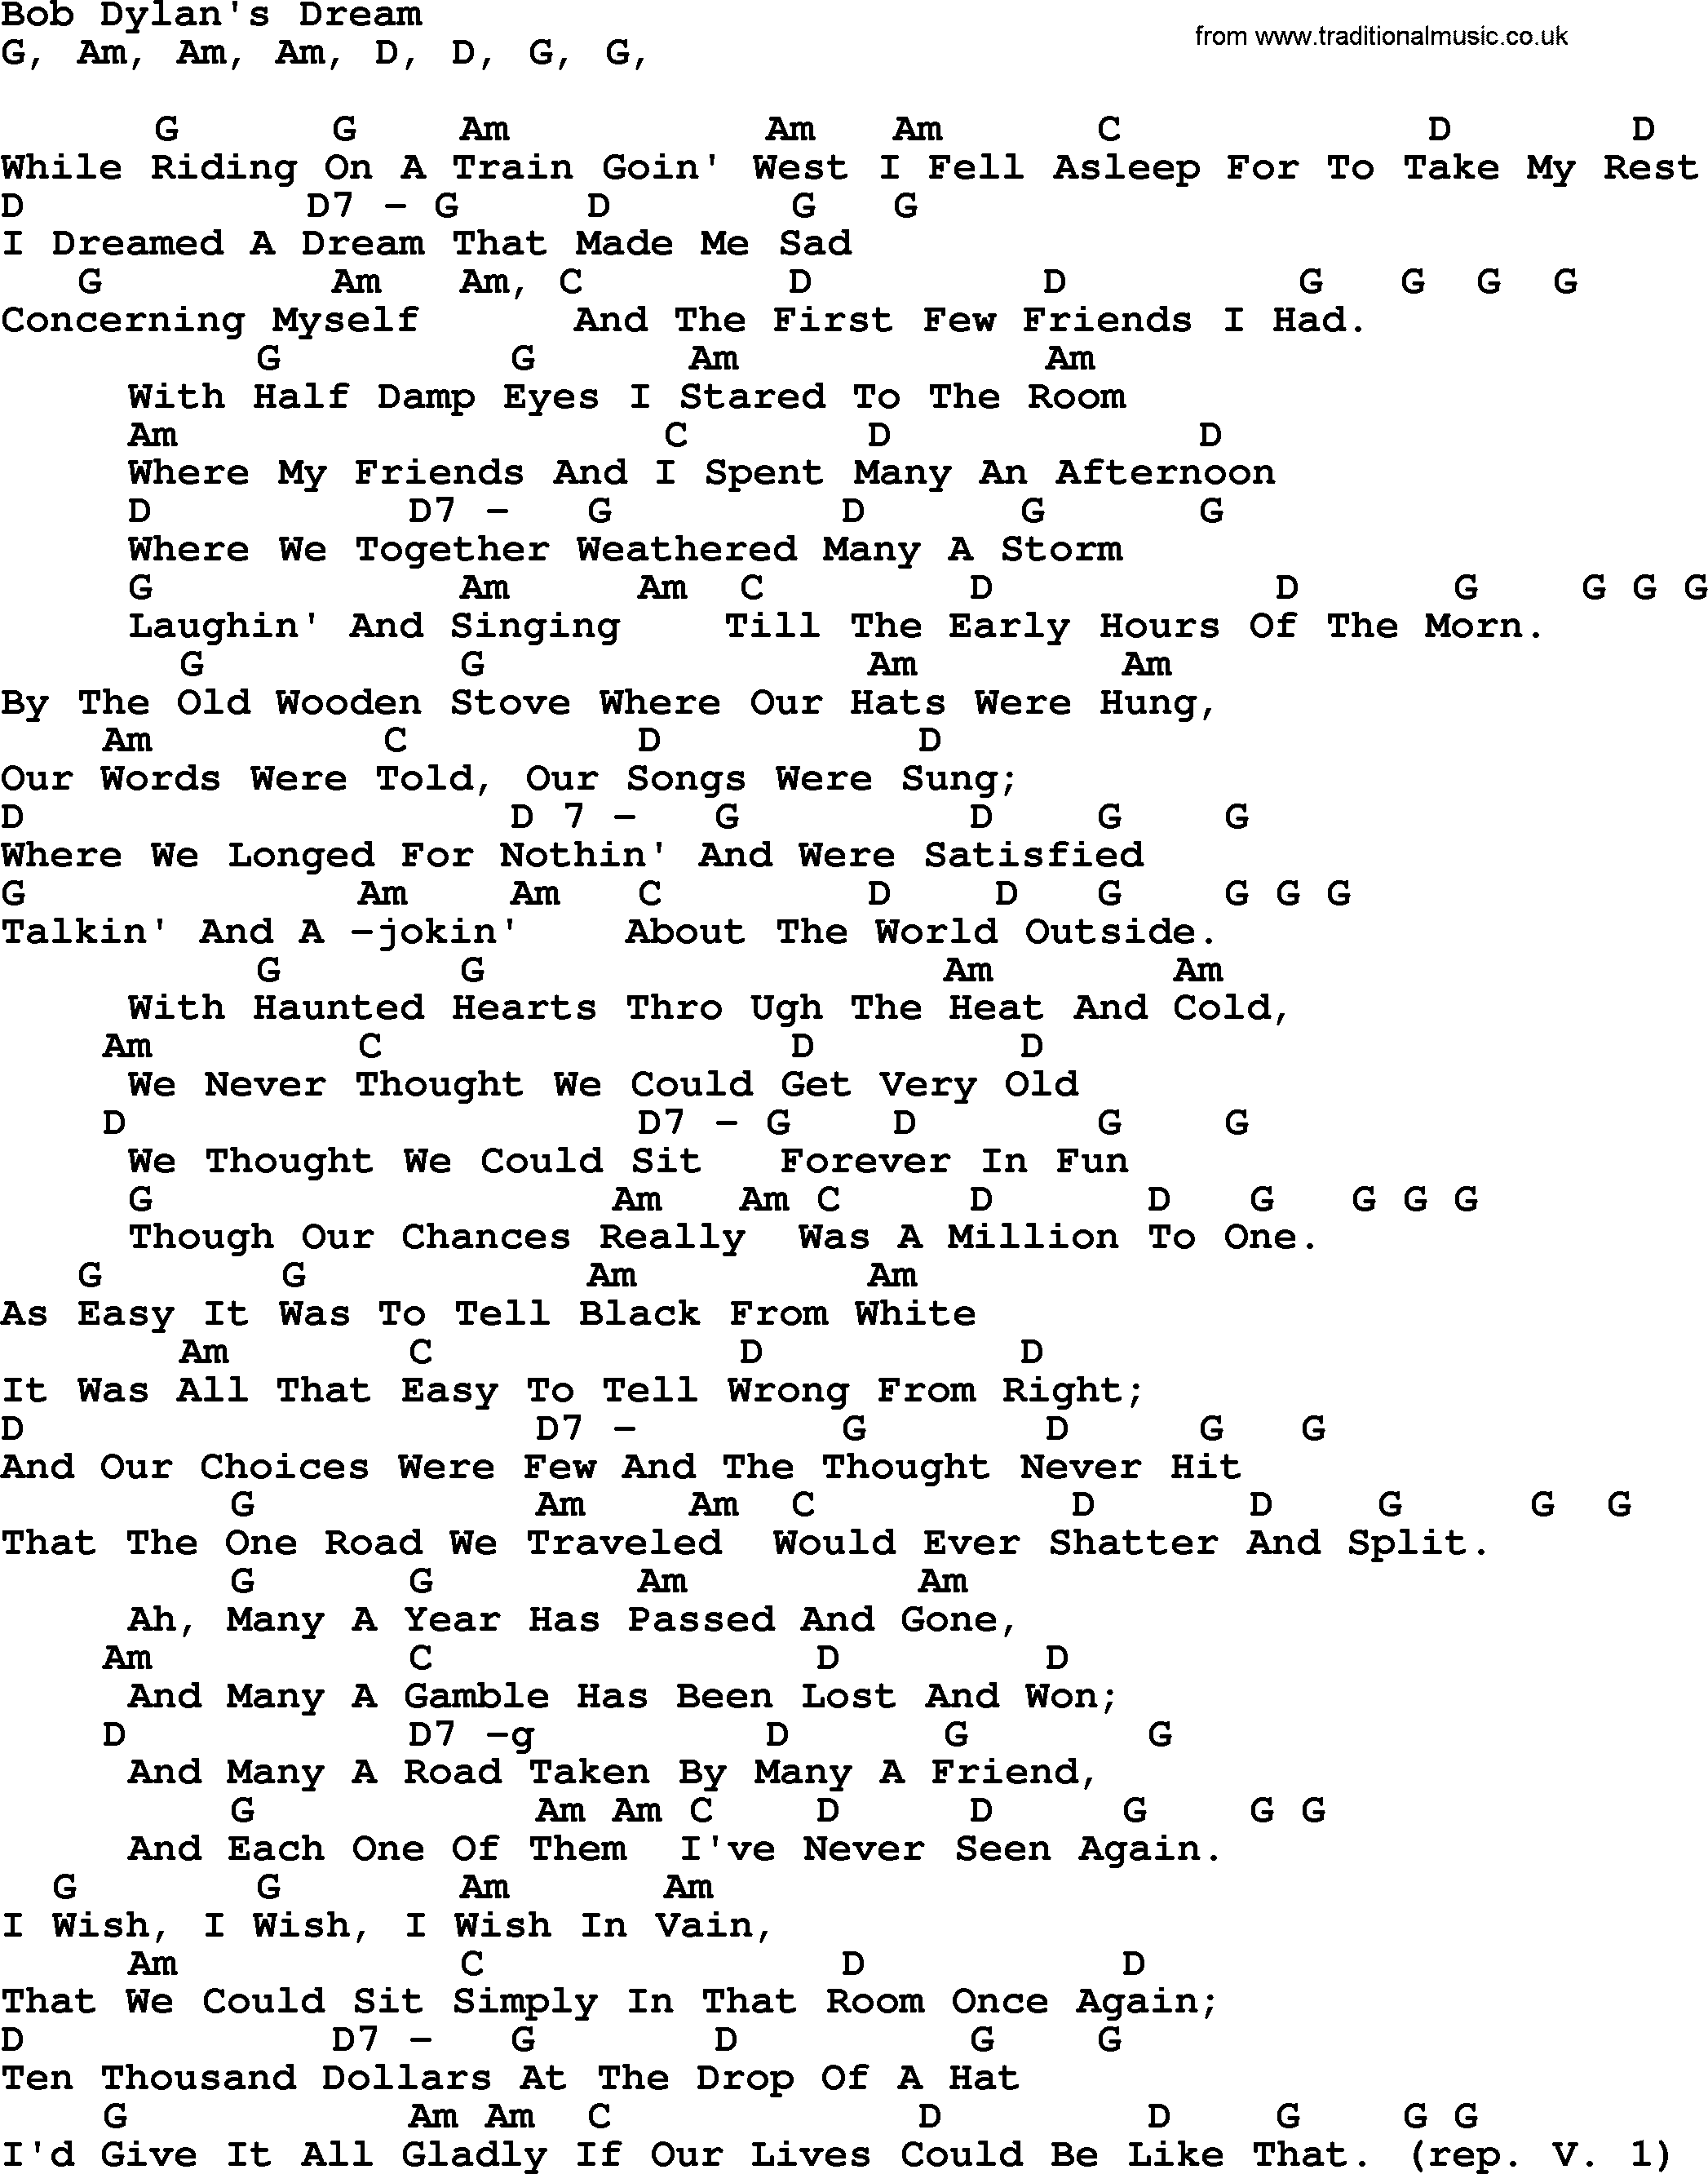 Peter, Paul and Mary song Bob Dylans Dream, lyrics and chords